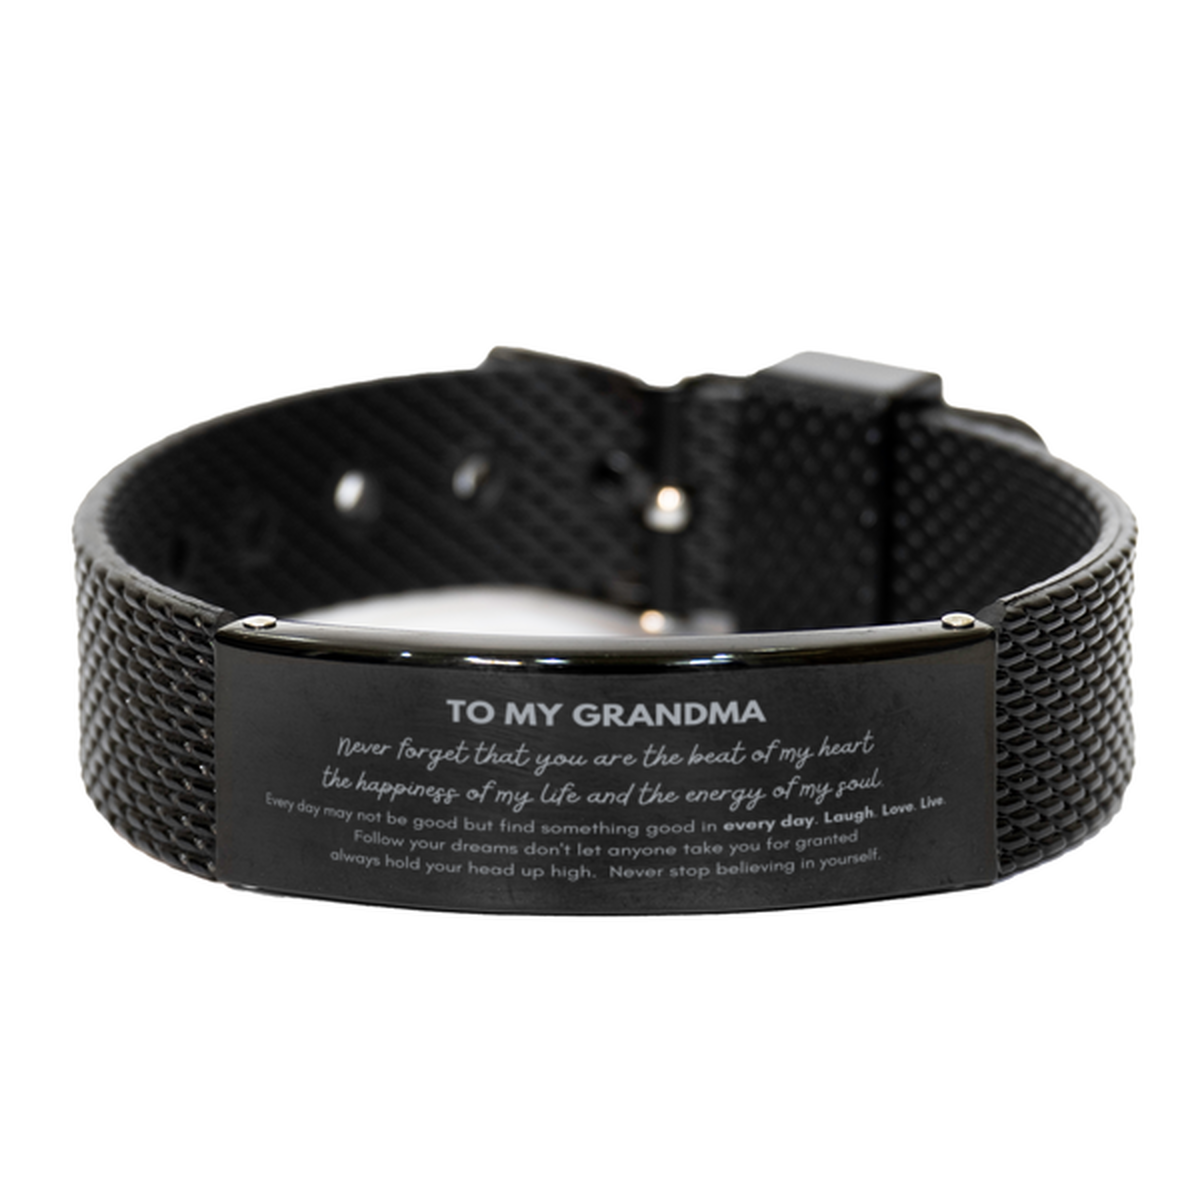 To My Grandma Bracelet Gifts, Christmas Grandma Black Shark Mesh Bracelet Present, Birthday Unique Motivational For Grandma, To My Grandma Never forget that you are the beat of my heart the happiness of my life and the energy of my soul